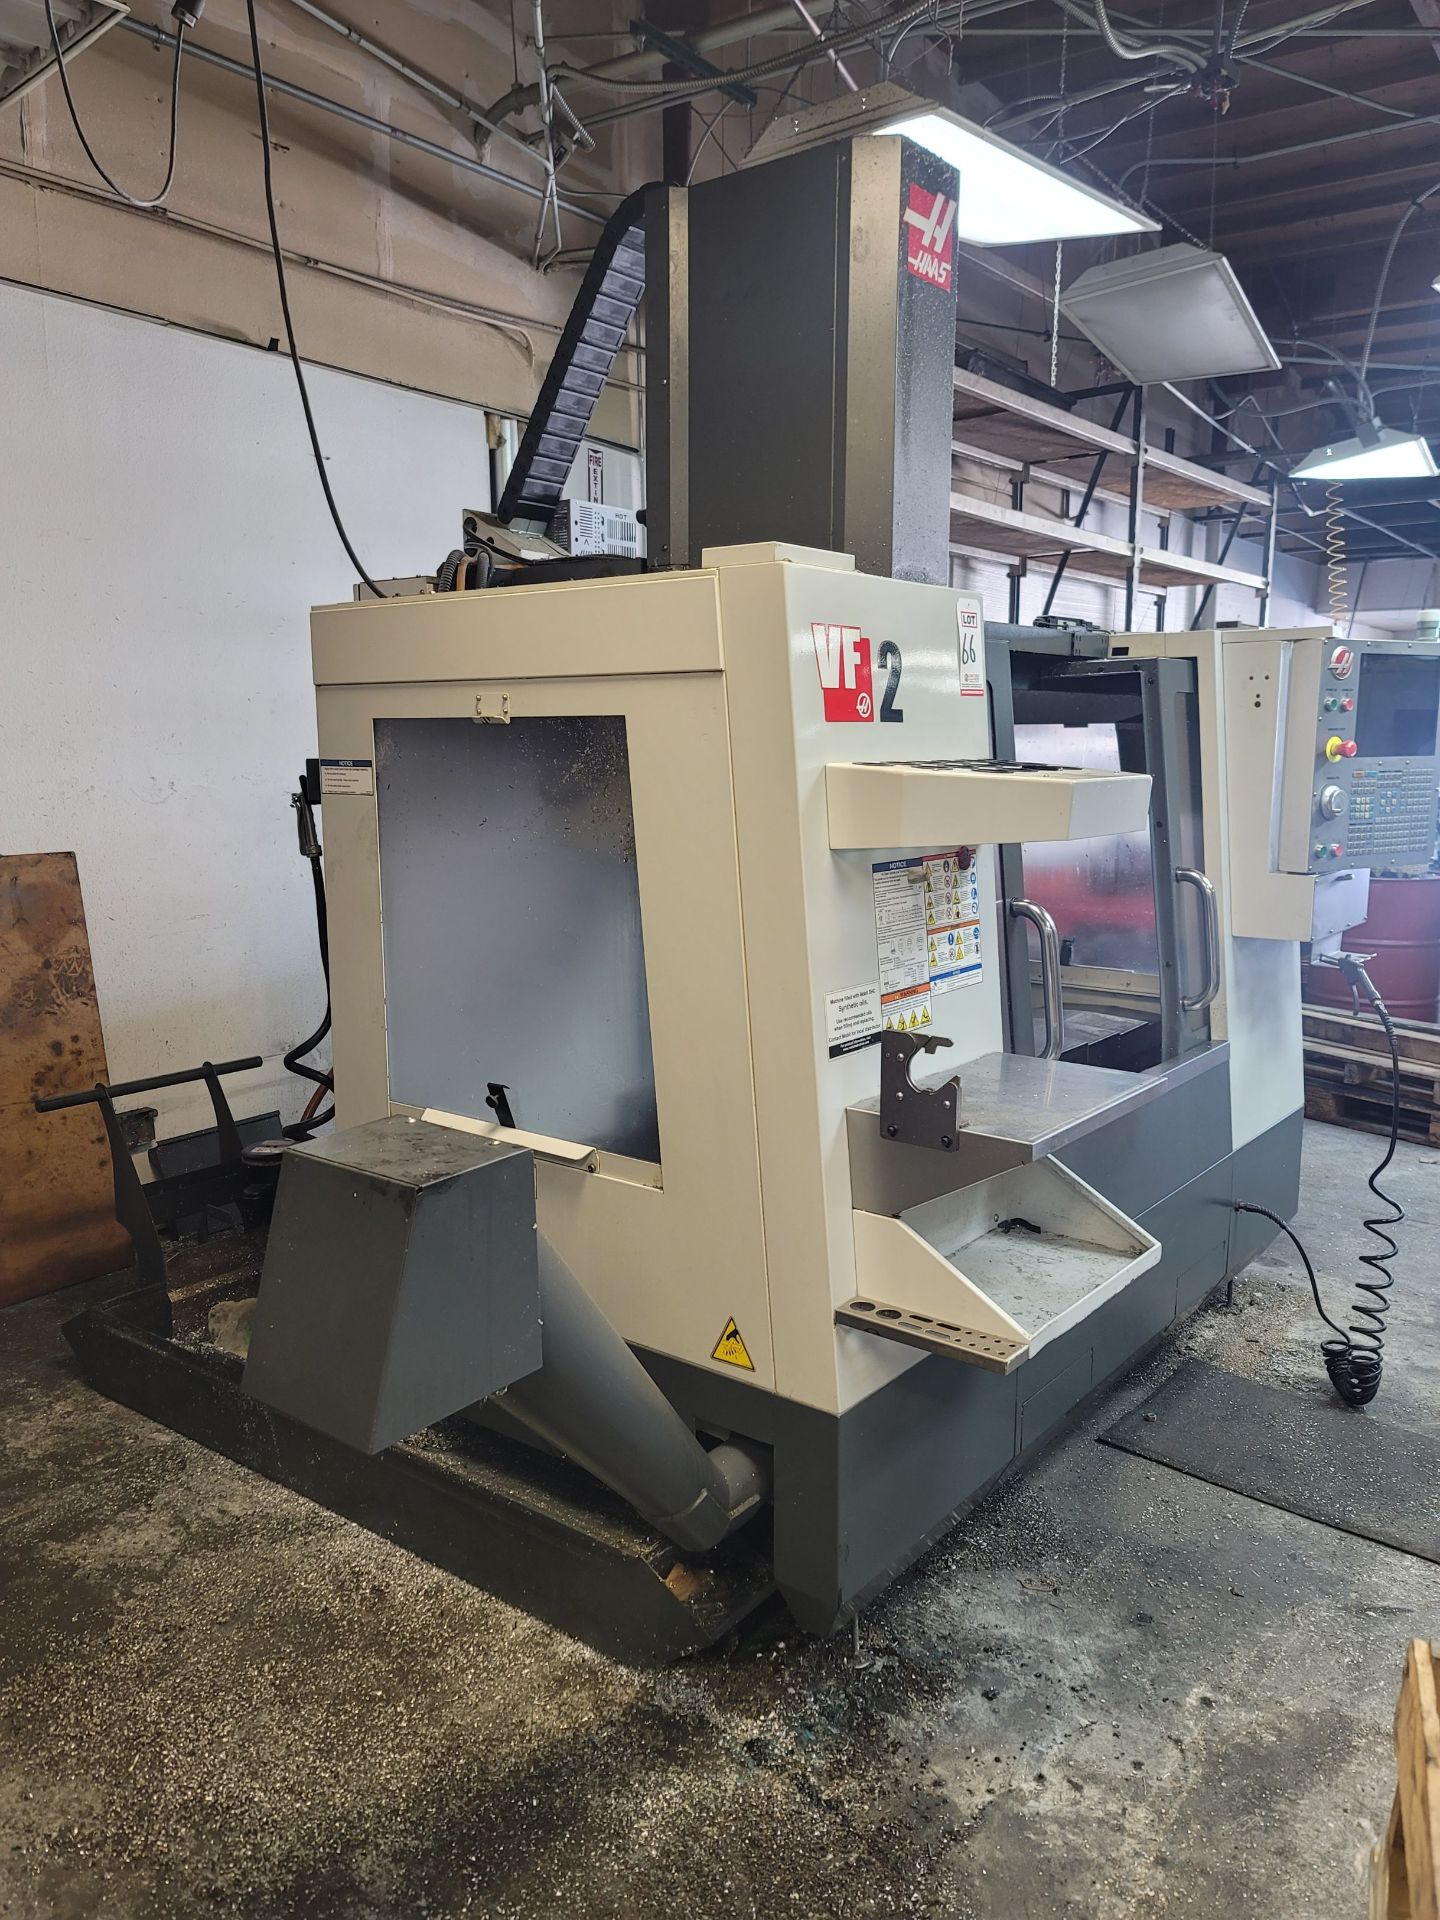 2011 HAAS VF-2 VERTICAL MACHINING CENTER, XYZ TRAVELS: 30" X 16" X 20", 36" X 14" TABLE, 20 HP, 8100 - Image 4 of 8